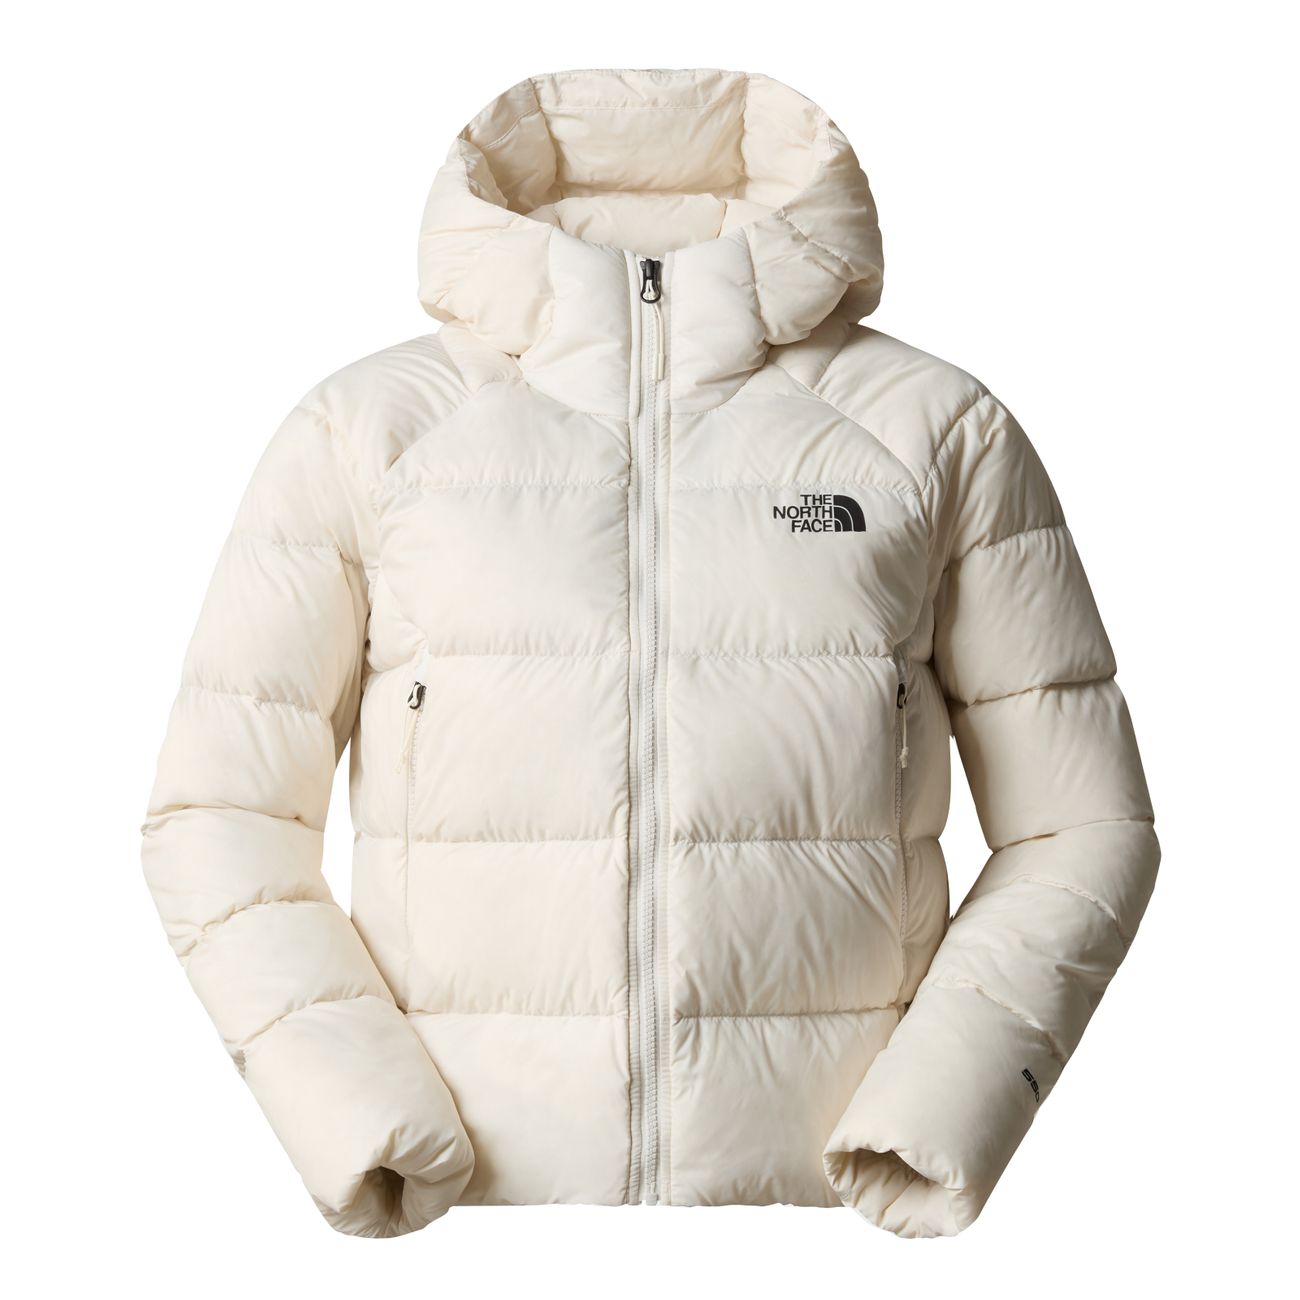 THE NORTH FACE HYALITE DOWN JACKET WITH HOOD Damen Winterjacke - The North Face - SAGATOO - 196573645974